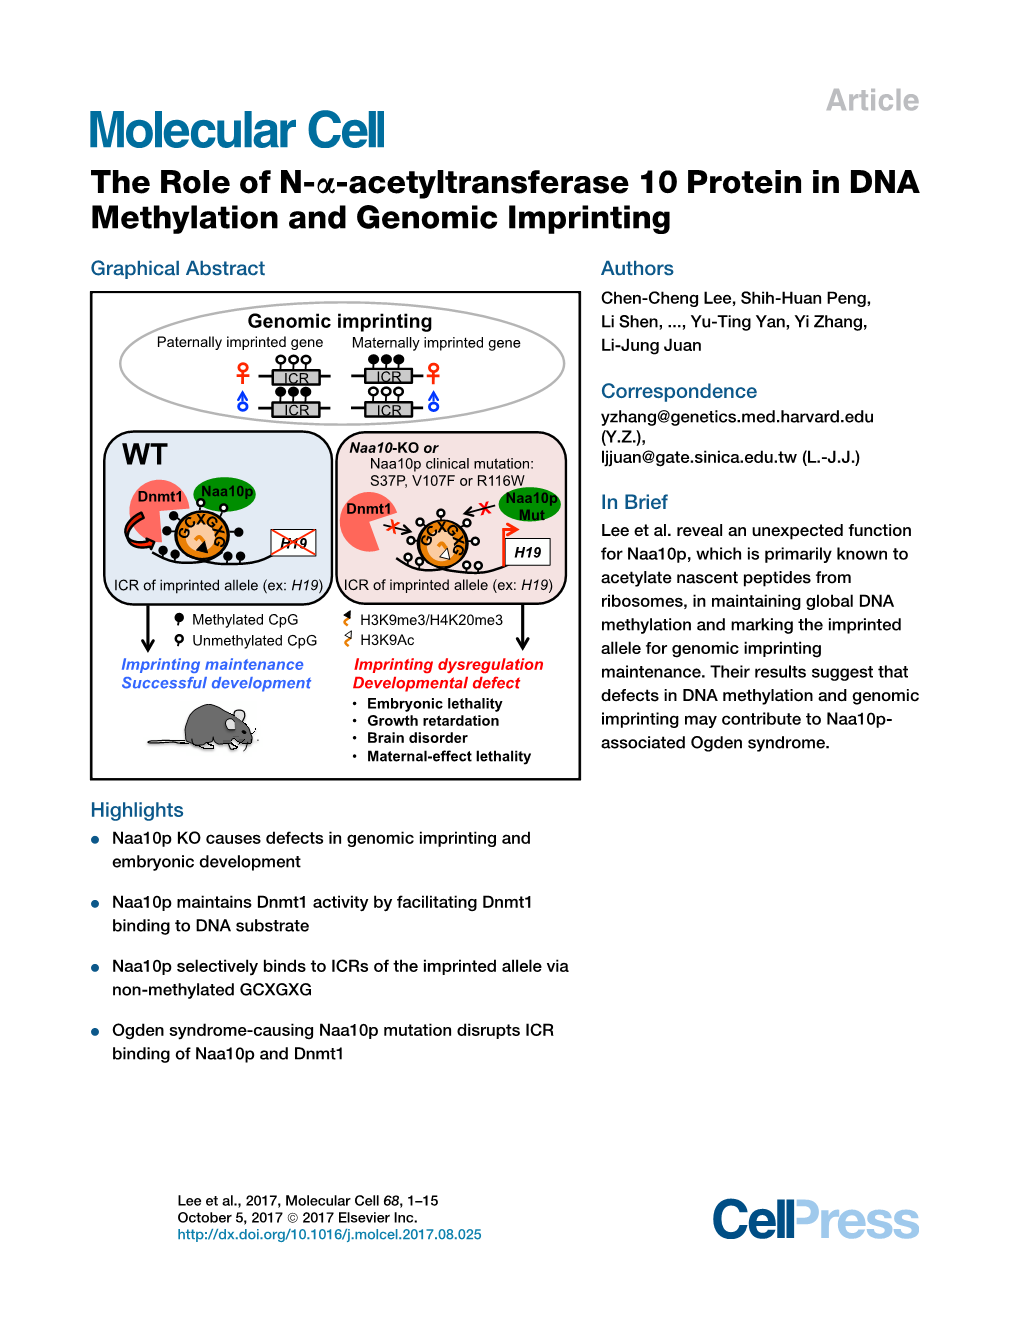 Acetyltransferase 10 Protein in DNA Methylation and Genomic Imprinting